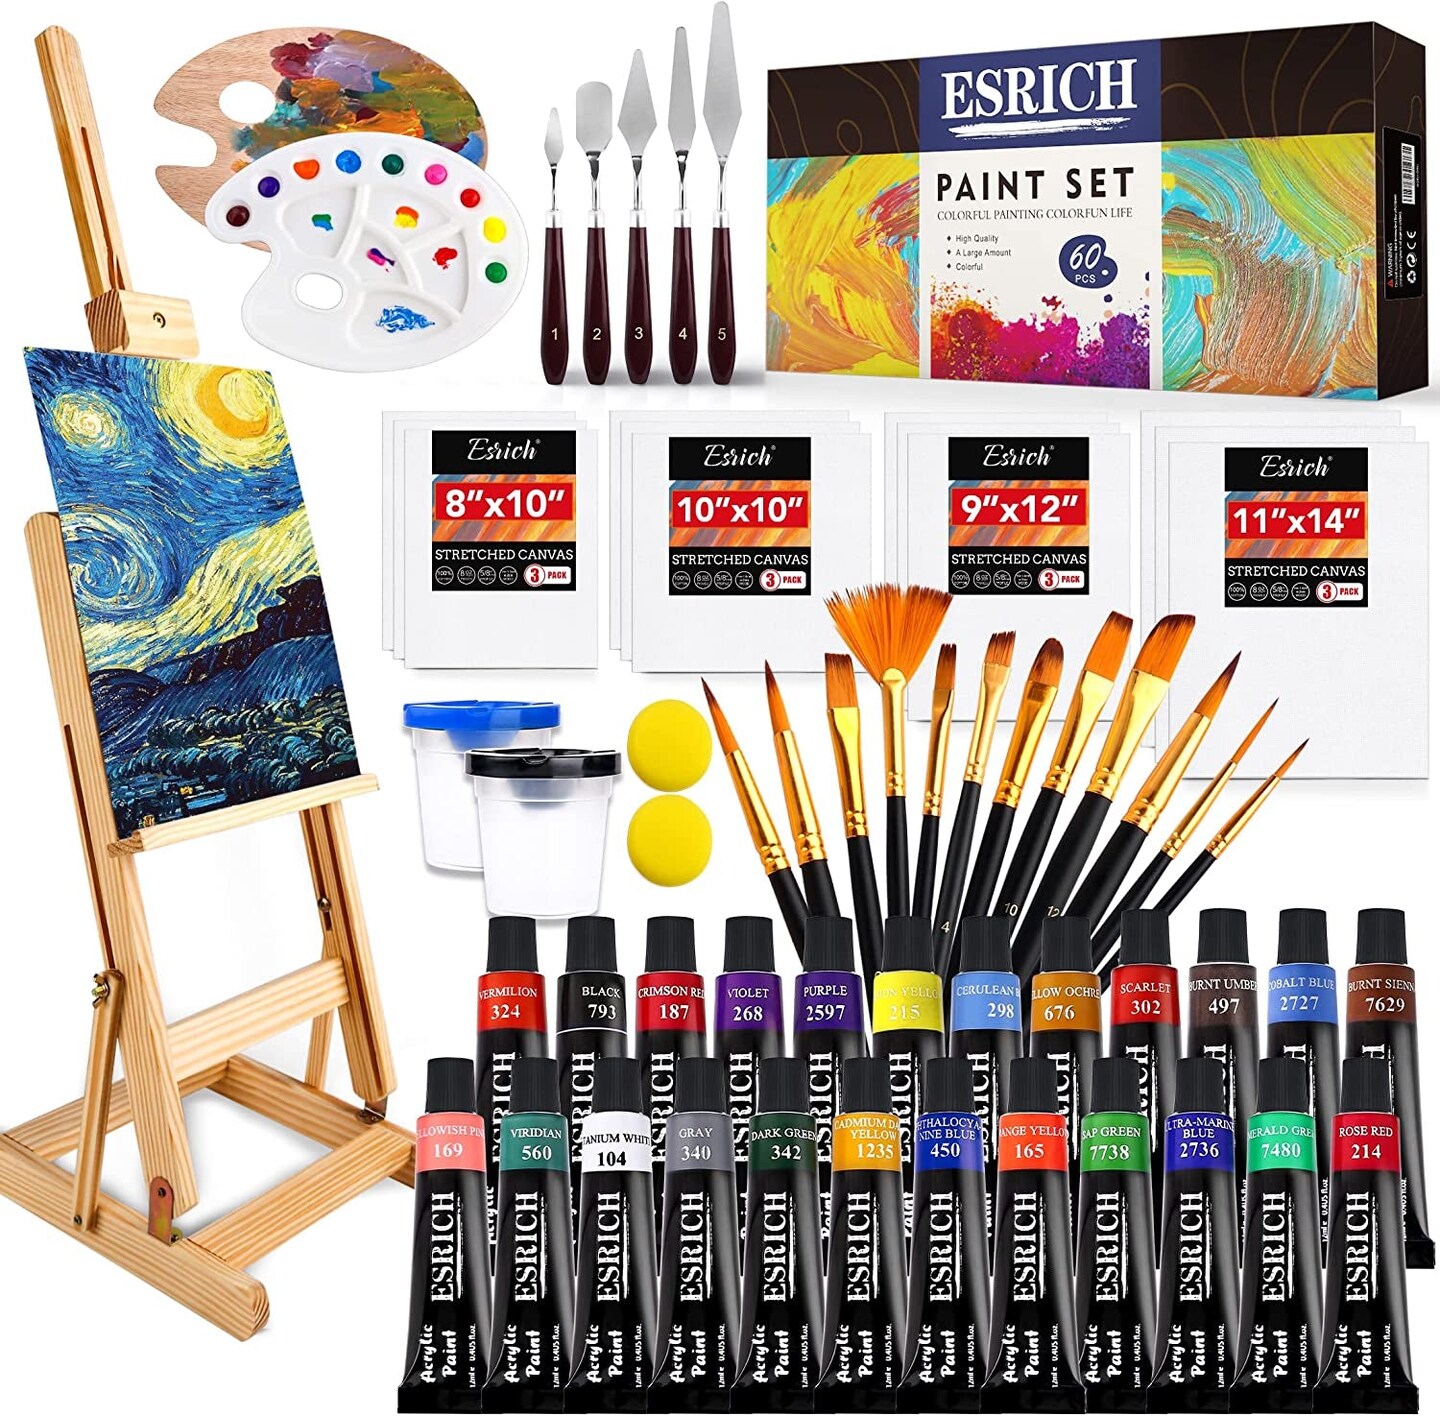 Acrylic Paint Set,57 PCS Professional Painting Supplies with Paint Brushes,  Acrylic Paint, Easel, Canvases, Painting Pads，Palette, Paint Knife, Brush